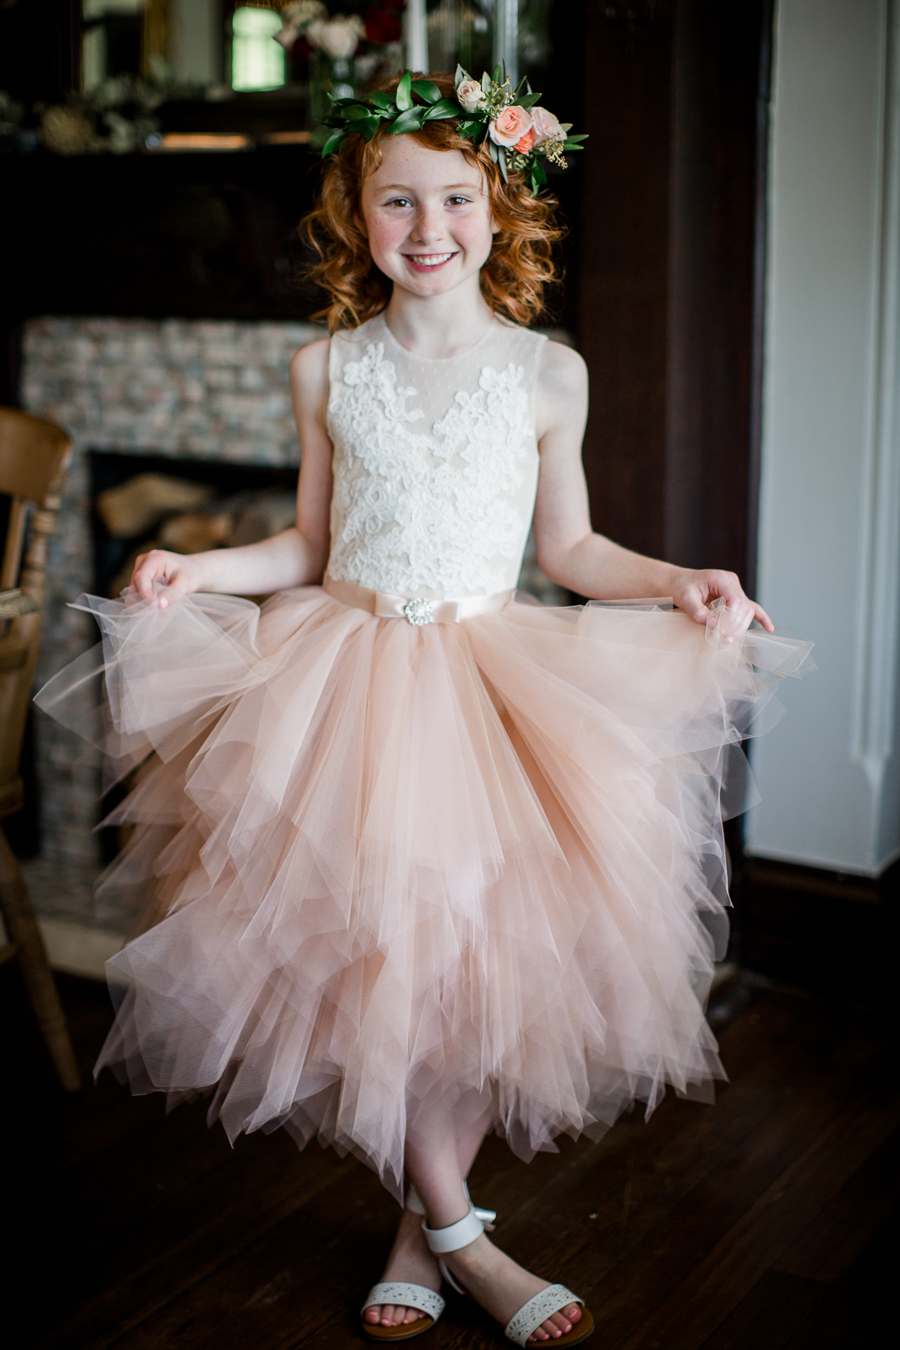 Flower Girl playing with dress at this North Carolina Elopement by Knoxville Wedding Photographer, Amanda May Photos.